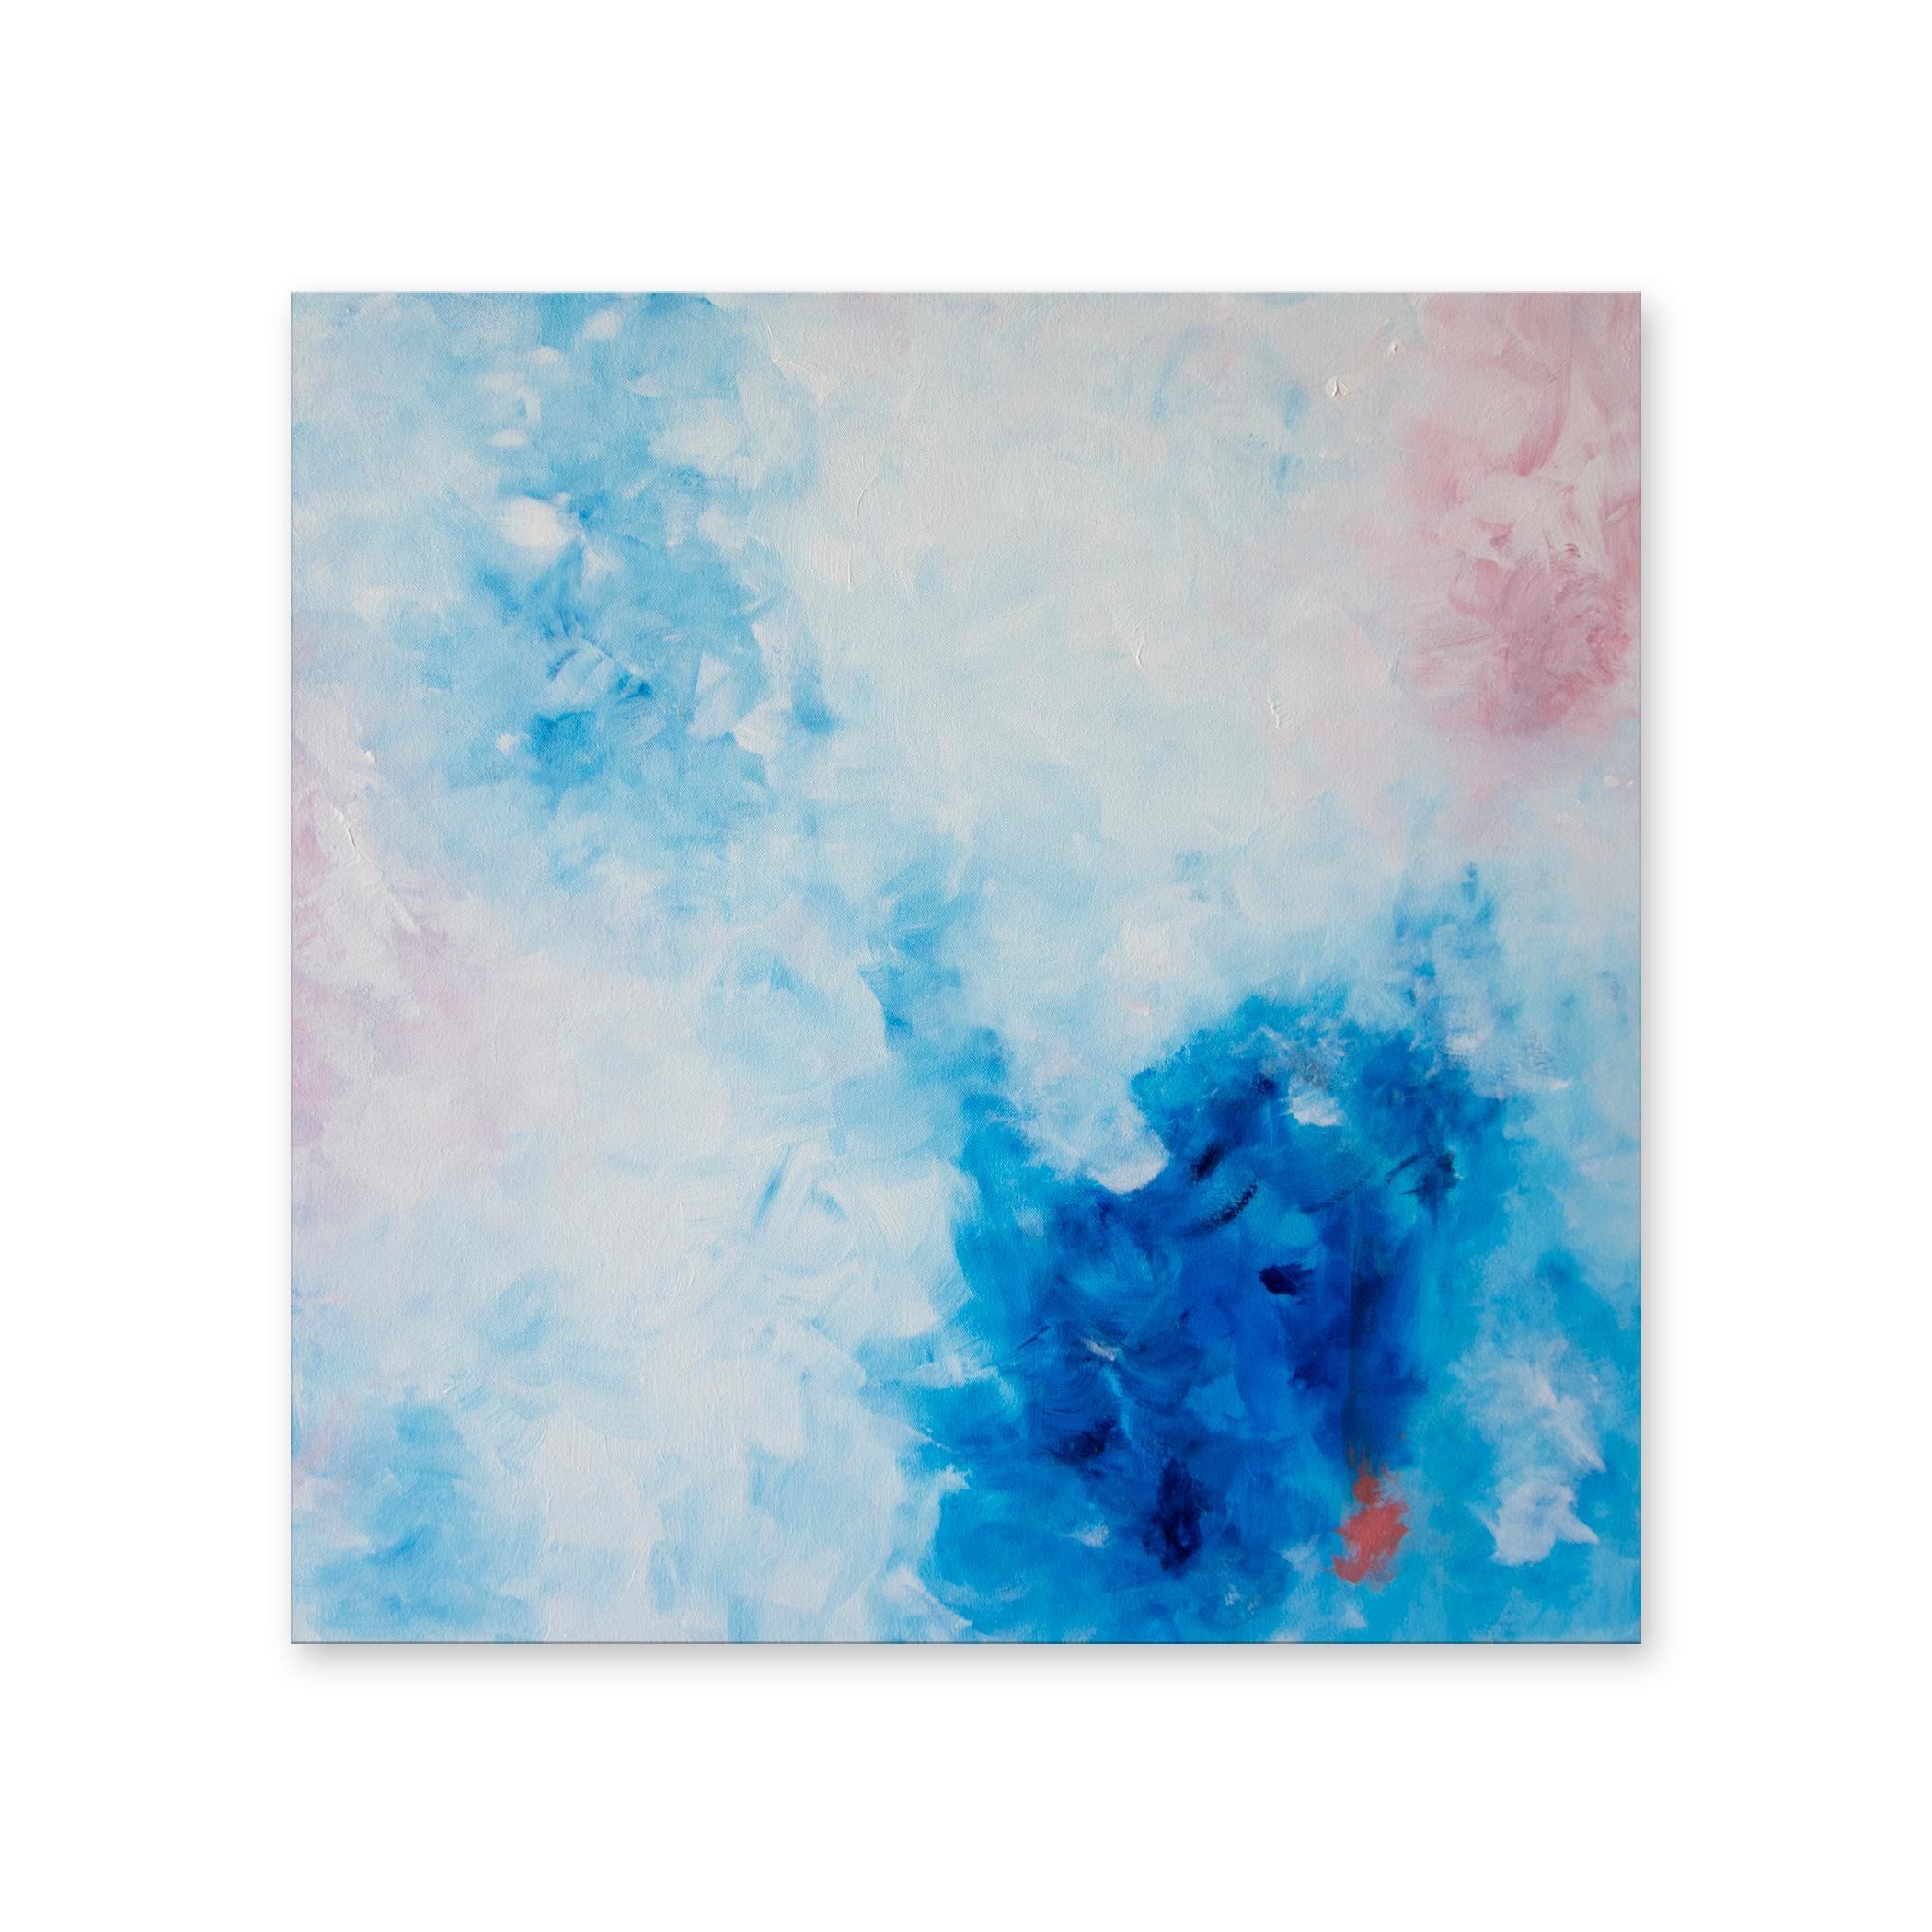 Enhance your space with this abstract expressionist painting, 'Mod Bloom' by Karen Moehr. An artist with a keen ability to create captivating works of art using minimal design elements. Known for bold brush strokes and soothing color palettes, her